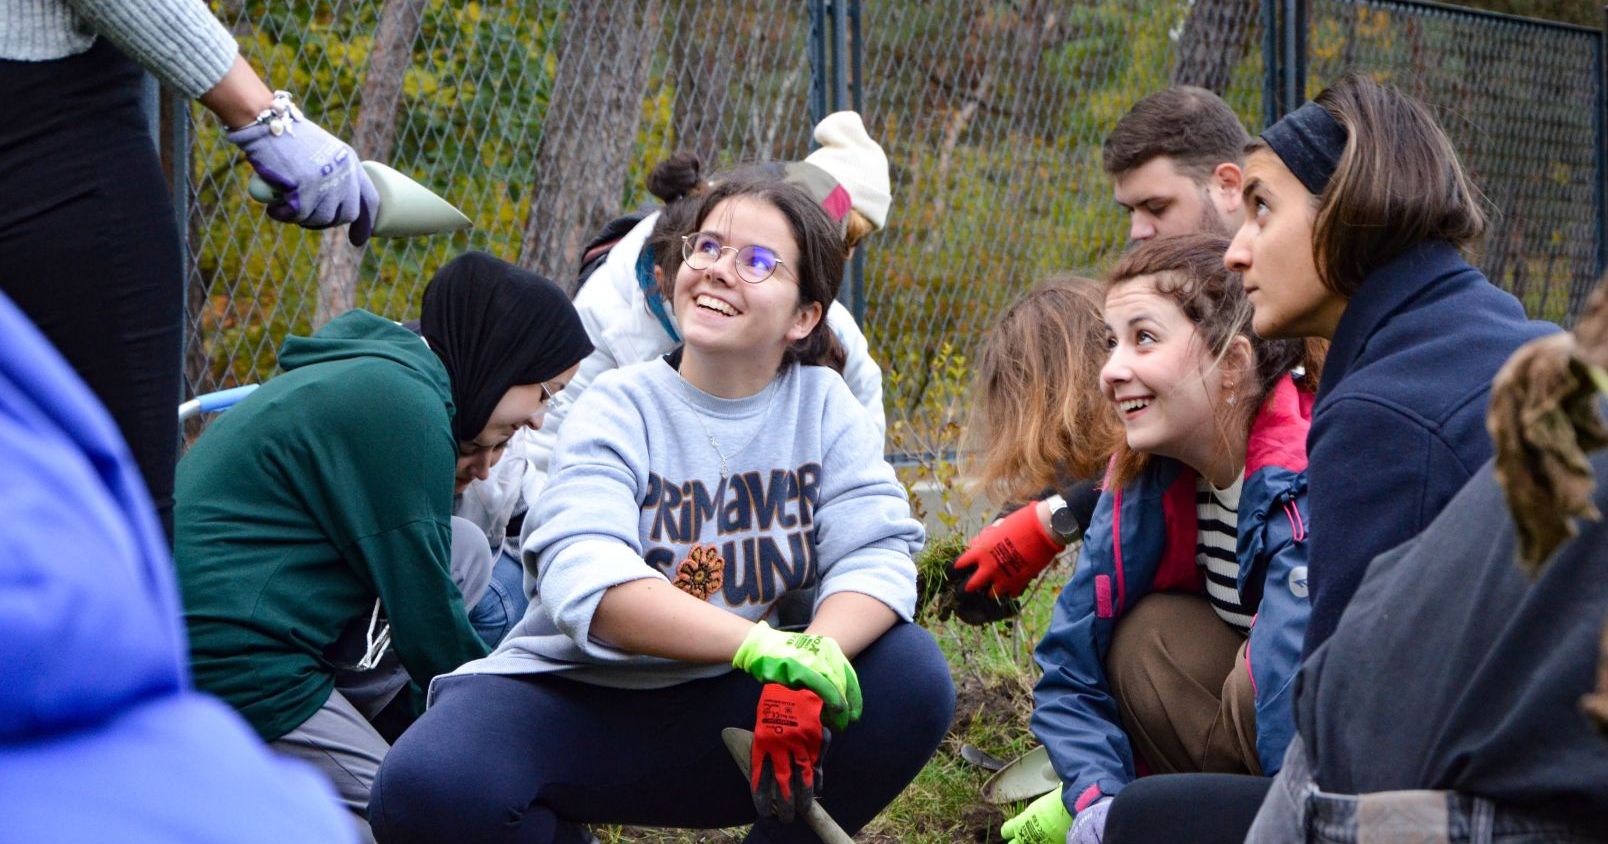 On 24 October, NCU international students took part in an action of planting tulips 